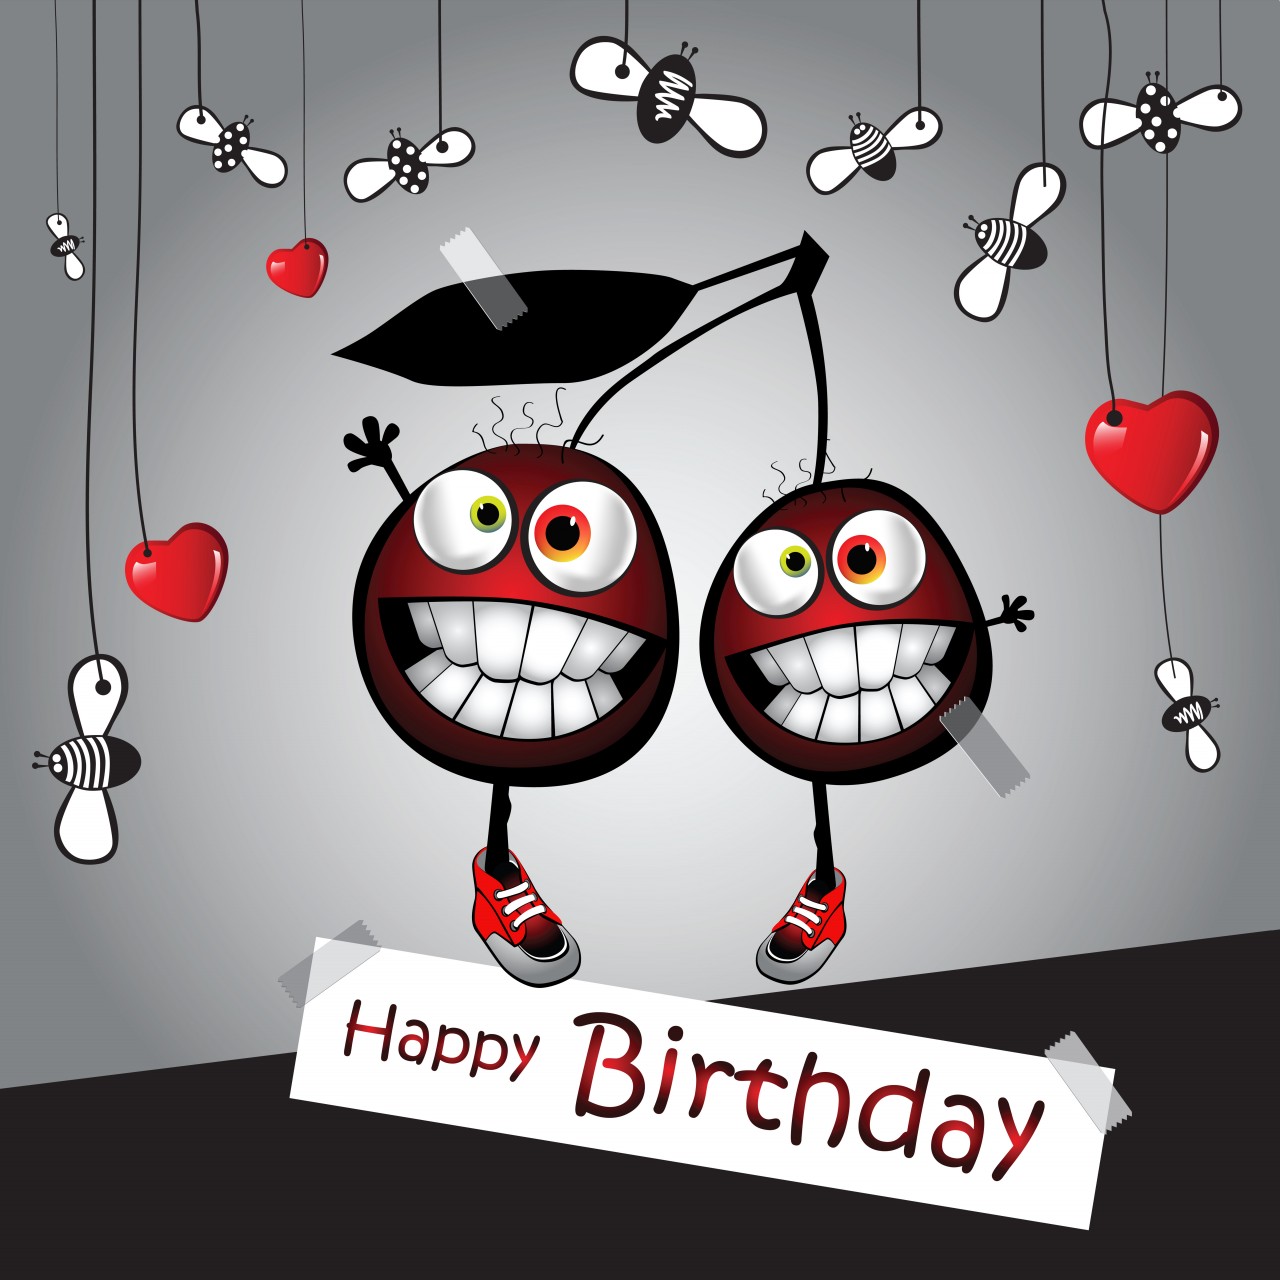 BirtHDay Funny Wallpaper Image Amp Pictures Becuo